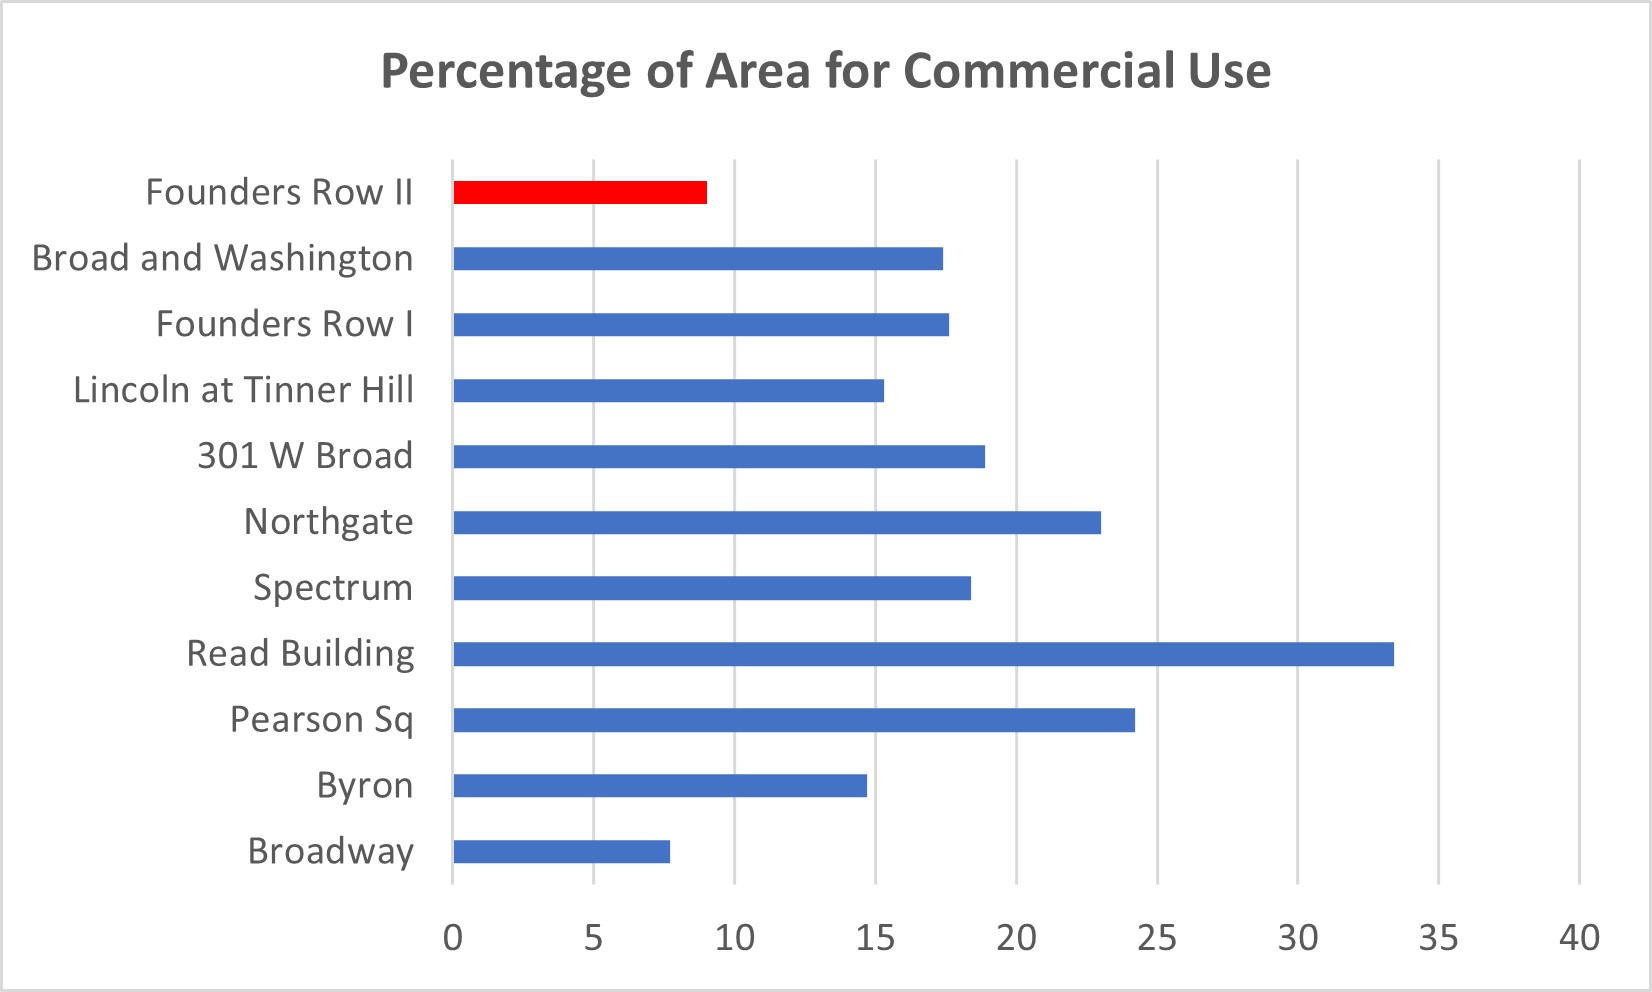 Graph of Percentage Commercial Area in Founders Row II and other Falls Church City Mixed Use projects